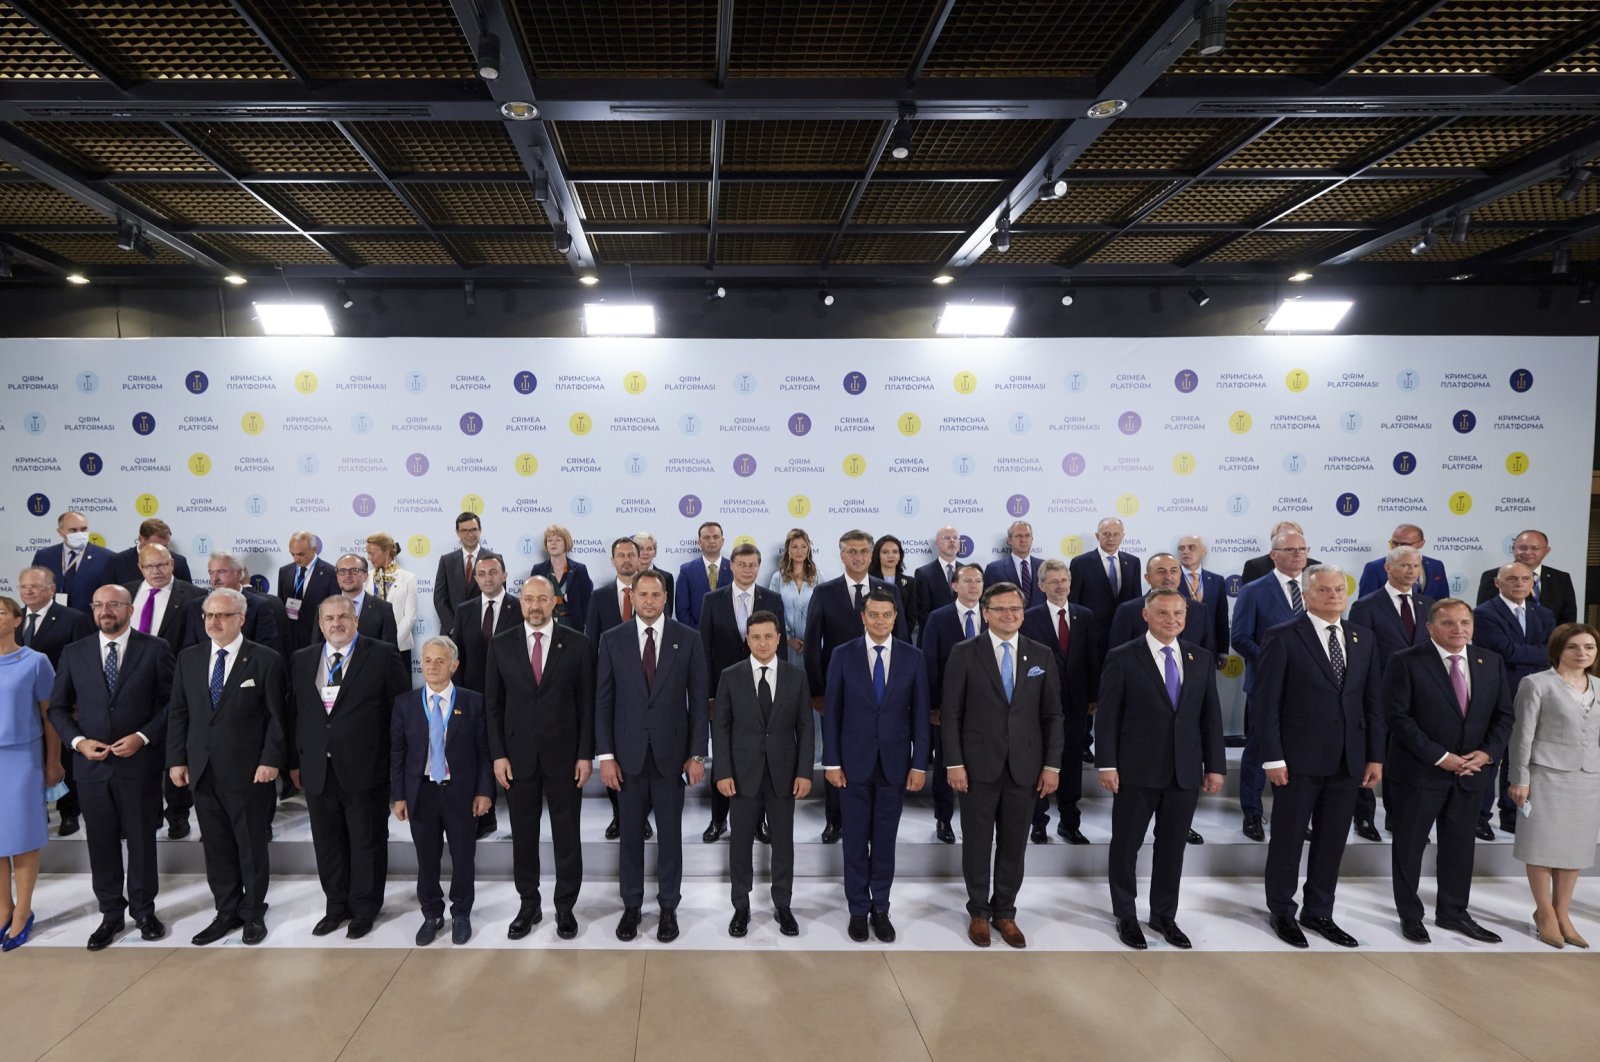 Ukrainian President Volodymyr Zelenskiyy and other officials pose for a group photo during the Crimea Platform summit in Kyiv, Ukraine, Aug. 23, 2021. (AP Photo)